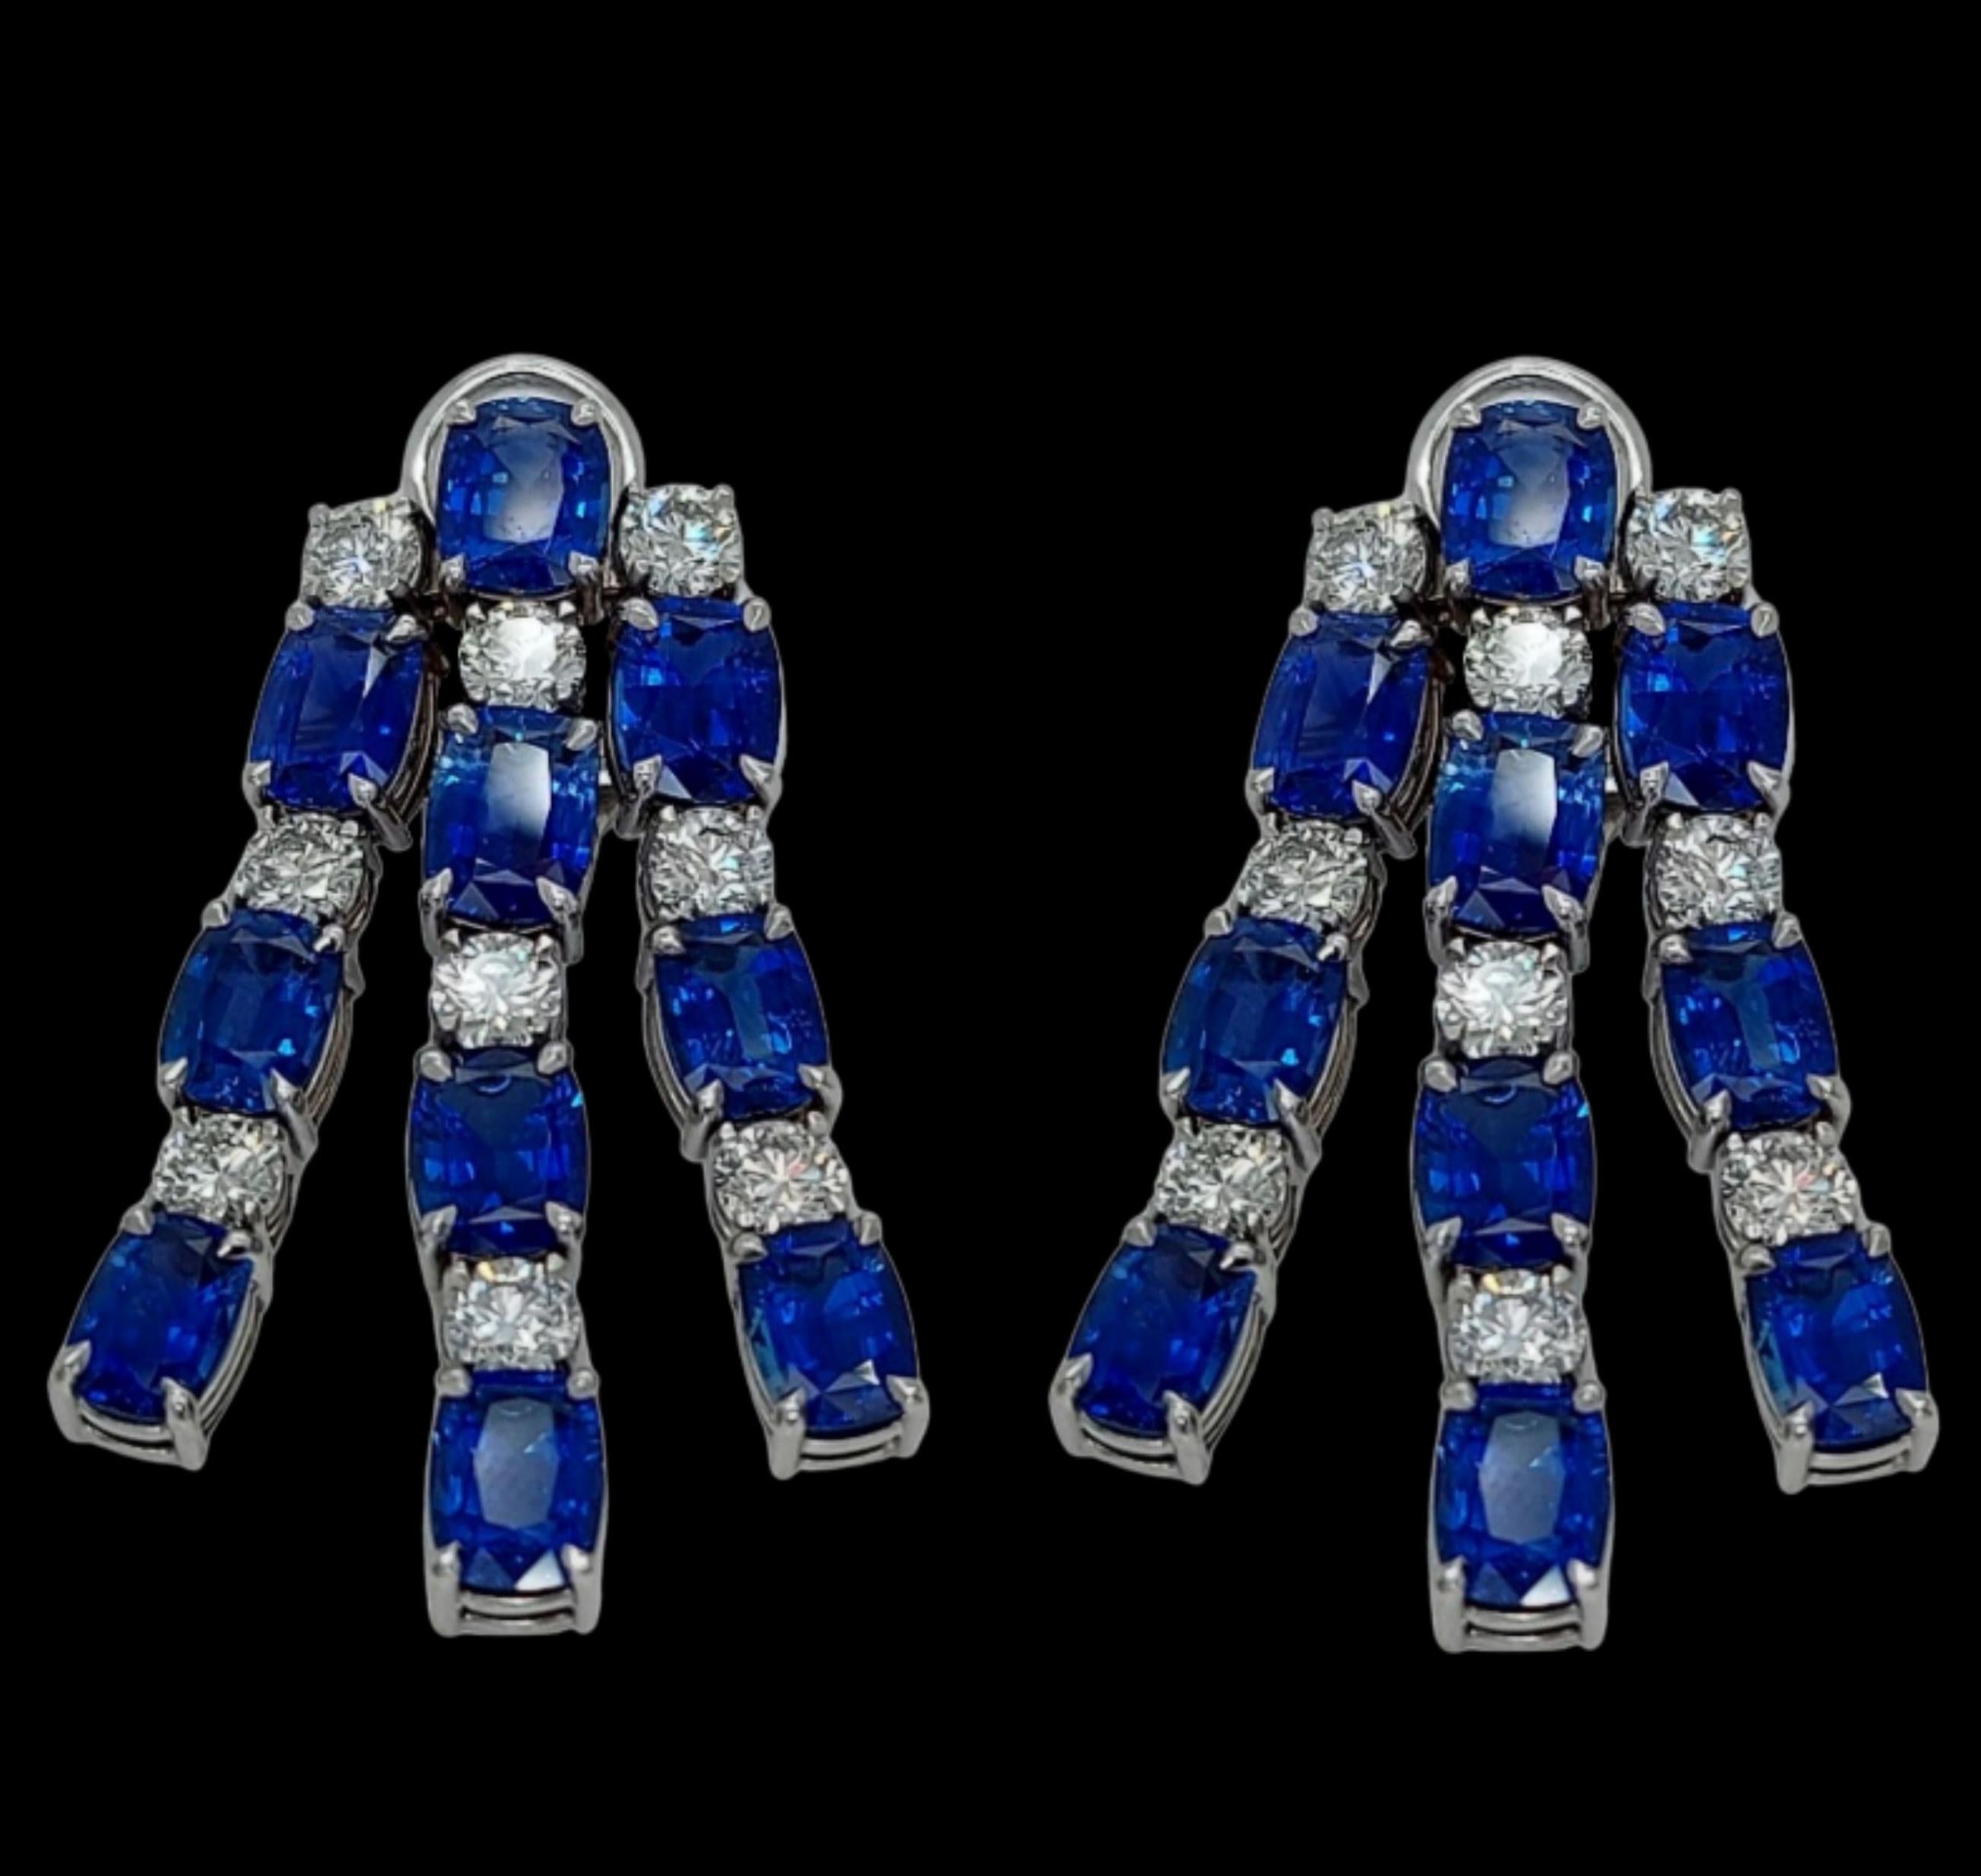 18kt White Gold Earrings with 21.42ct Sapphires, 5.09ct Diamonds, CGL Certified

Extremely nice sapphire and diamond earrings.

Sapphires: 20 Ceylon/Madagascar sapphires together 21.42 carat in total. Vivid blue, Cushion shape, Variety of corundum